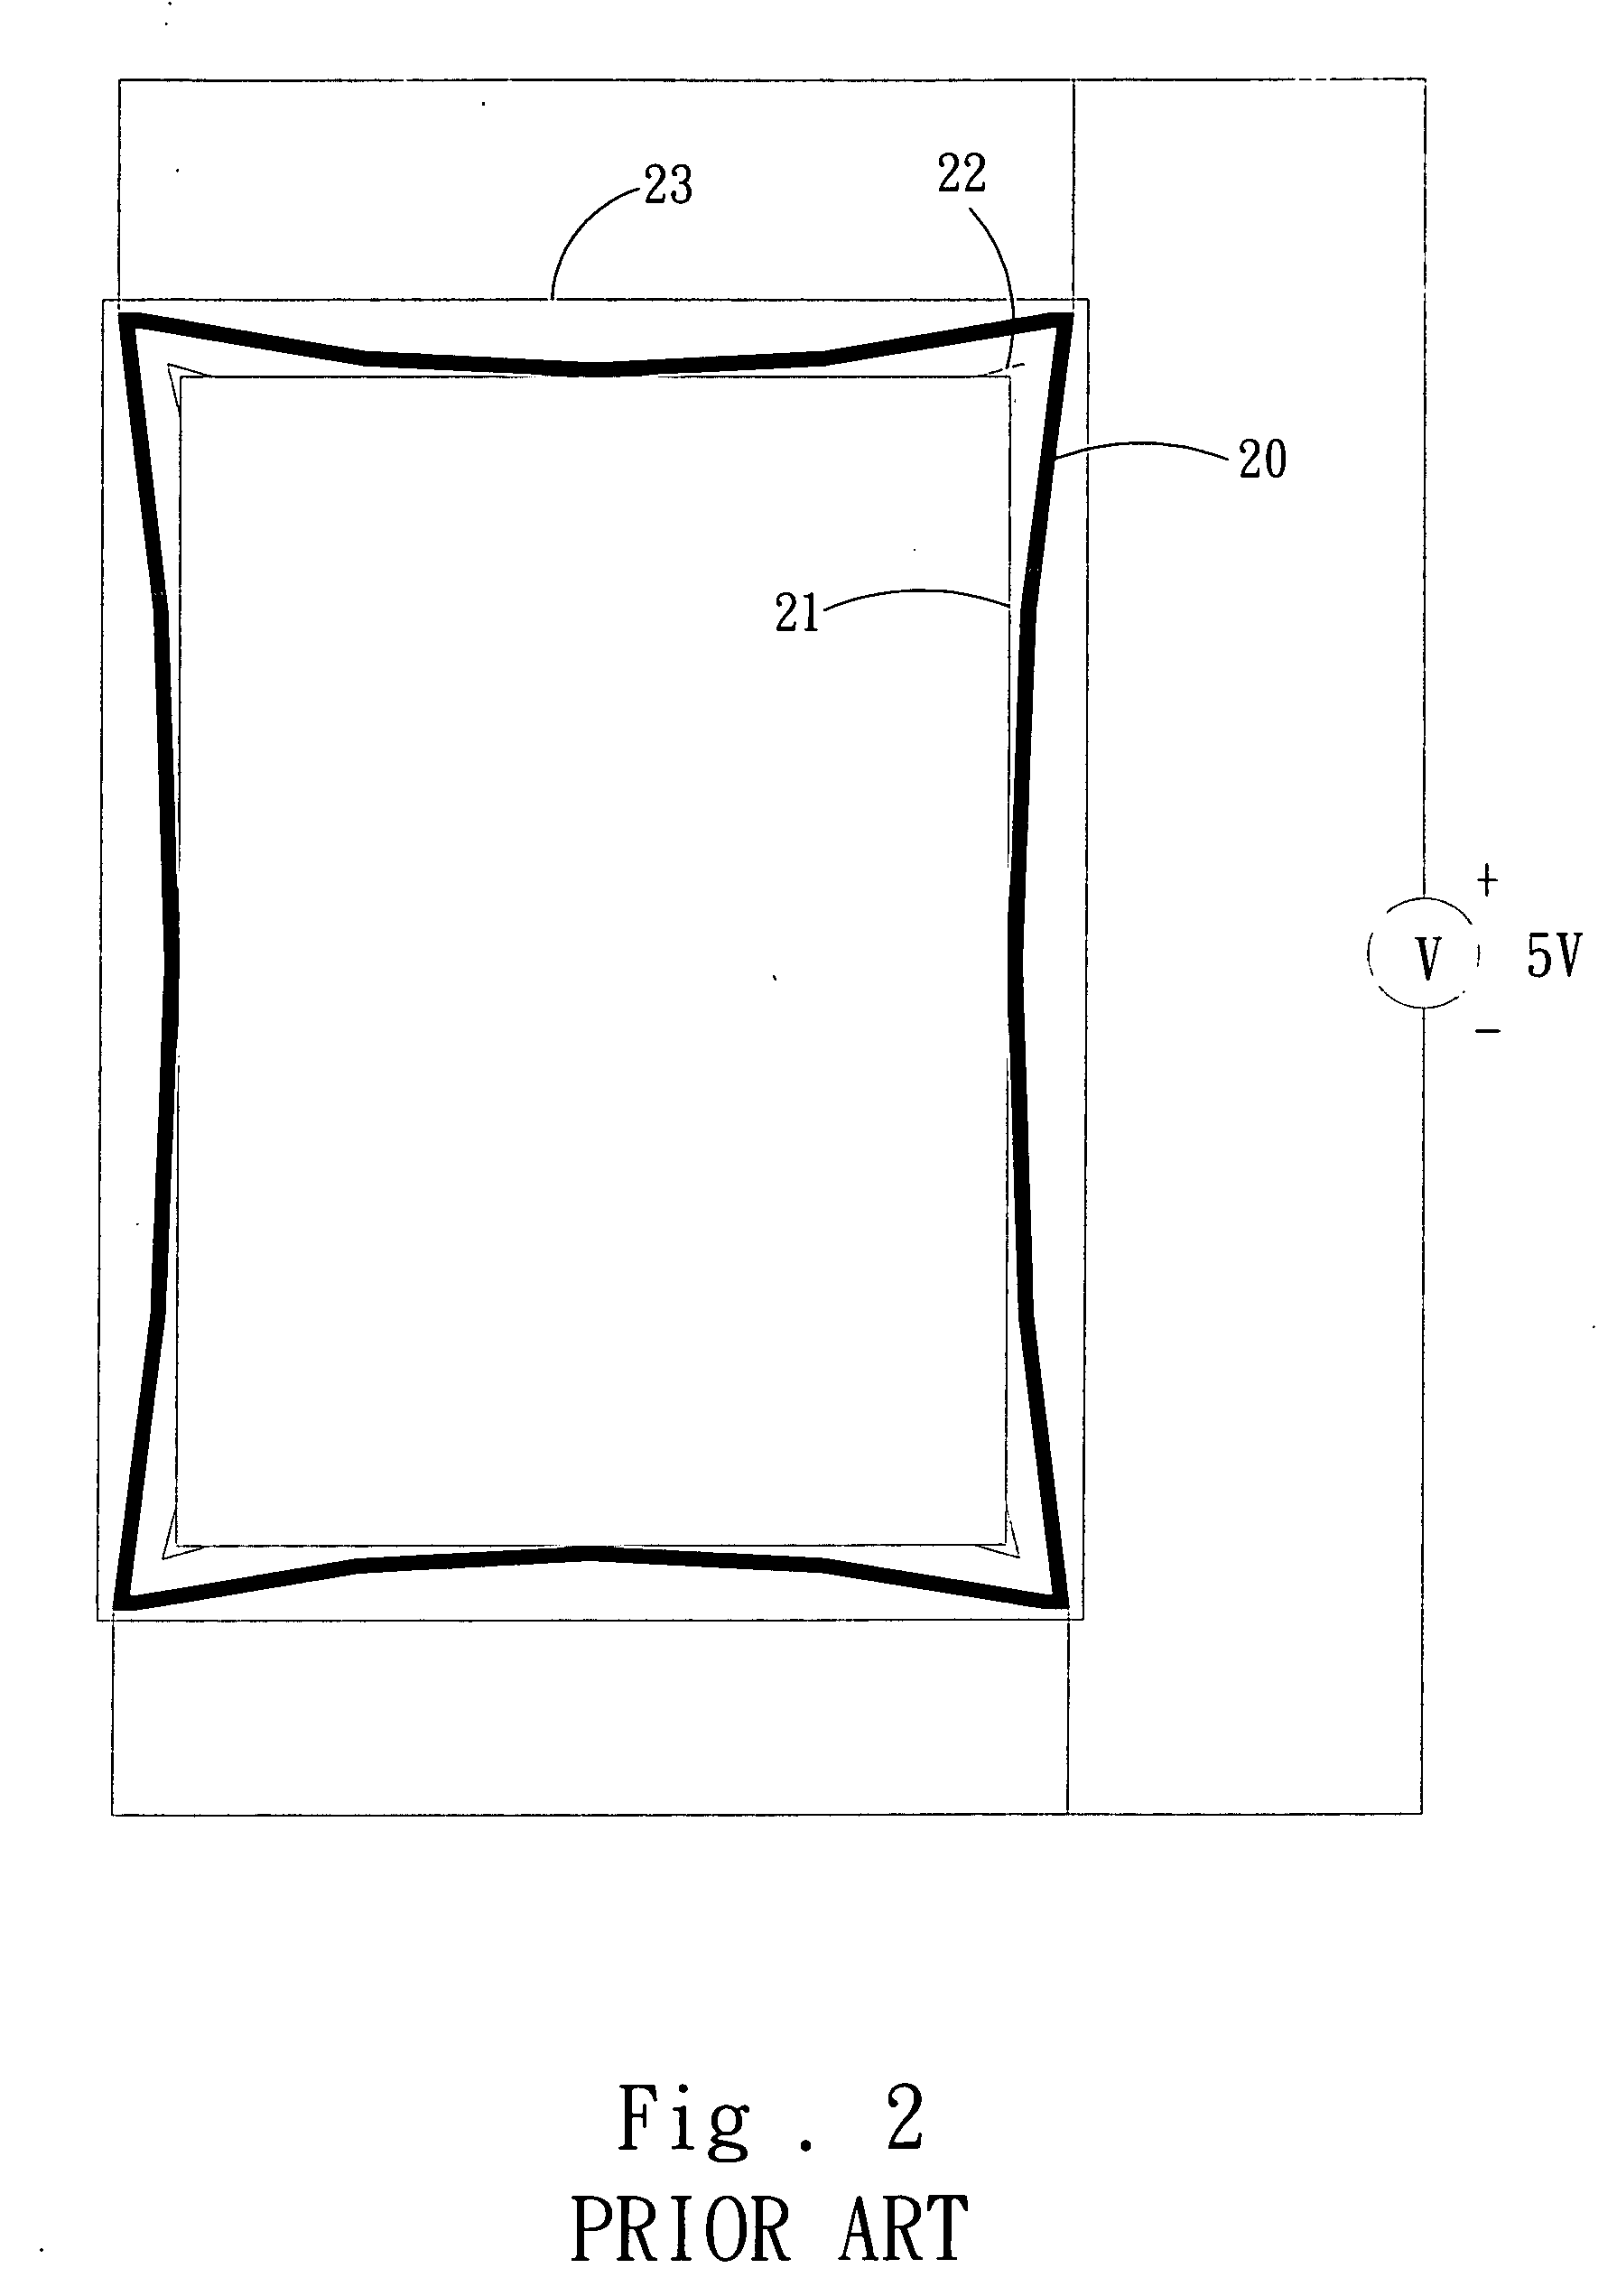 Electrode pattern for touch panels